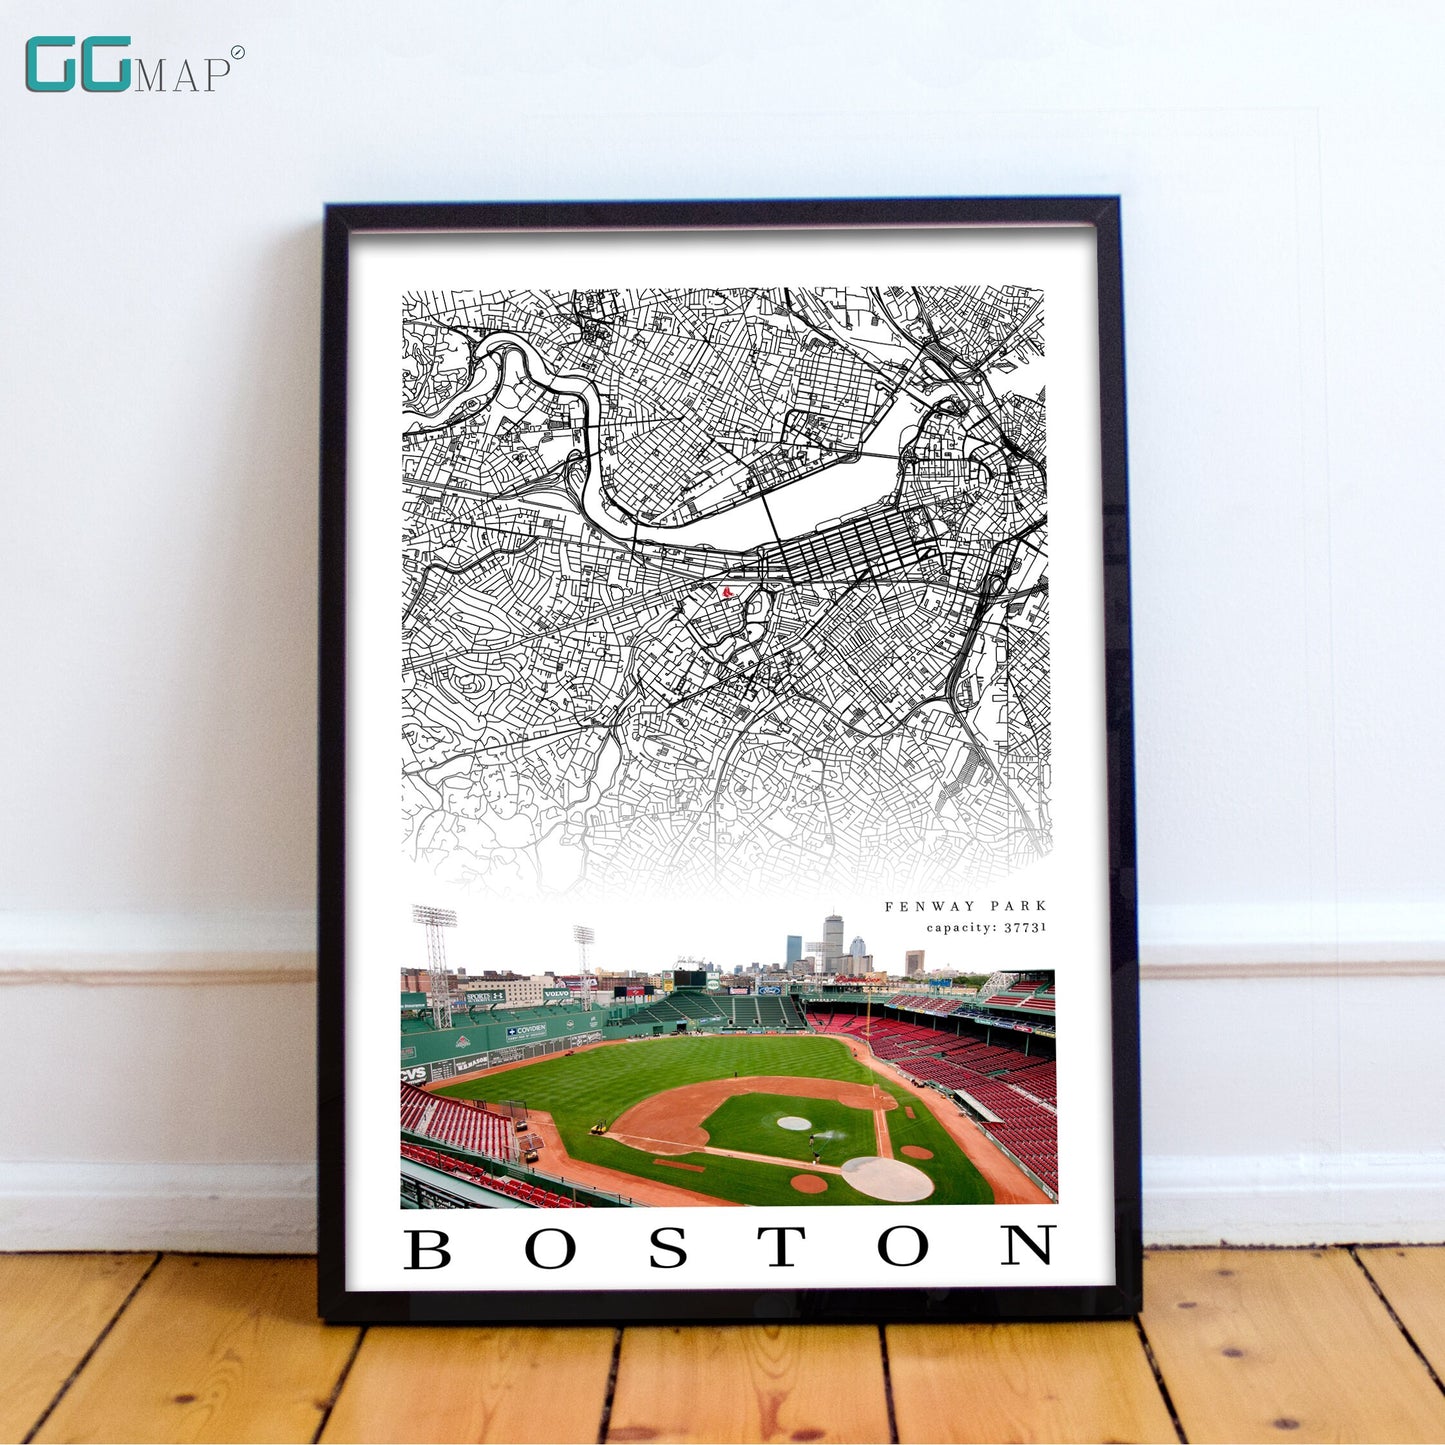 City map of BOSTON - Fenway Park - Home Decor New York - Fenway Park wall decor - Boston poster - Print map - Red Sox